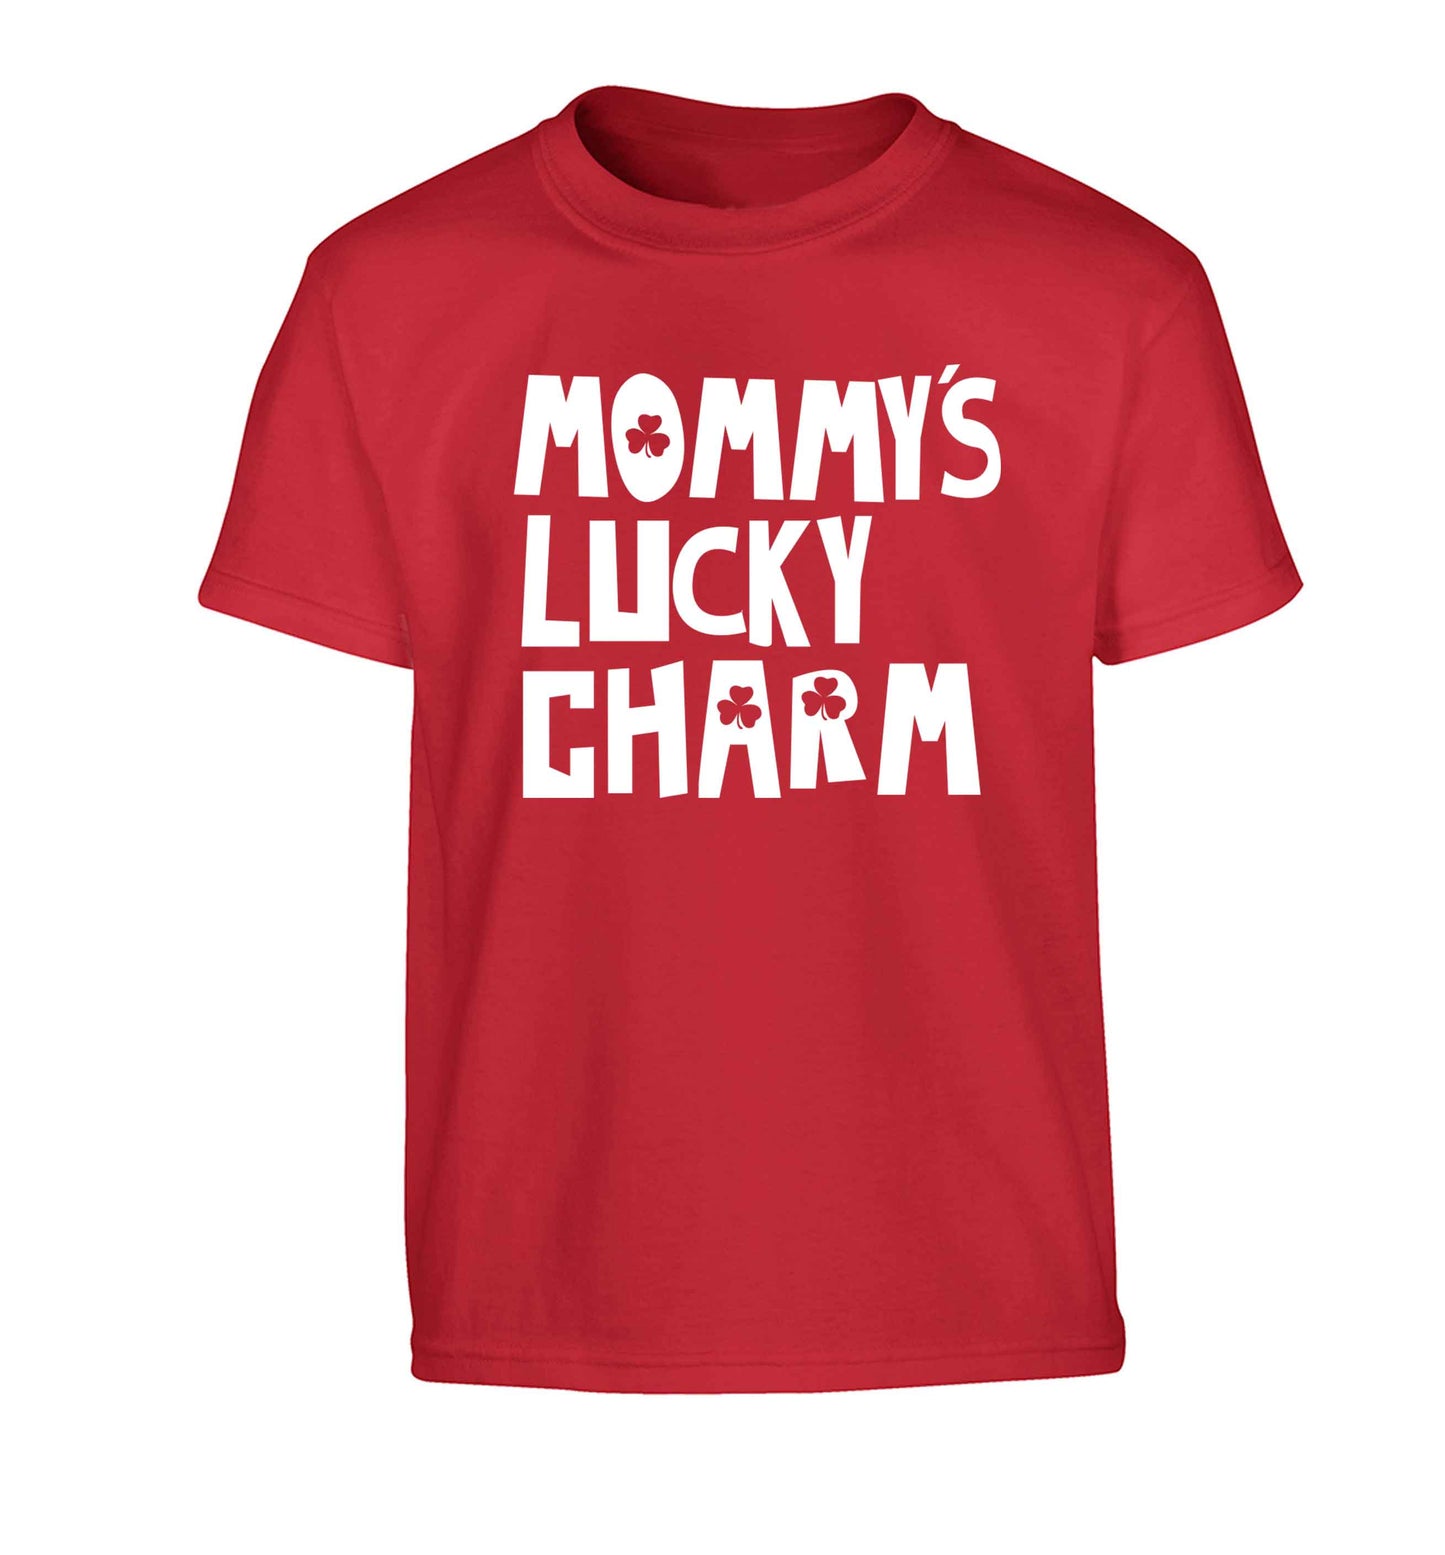 Mommy's lucky charm Children's red Tshirt 12-13 Years